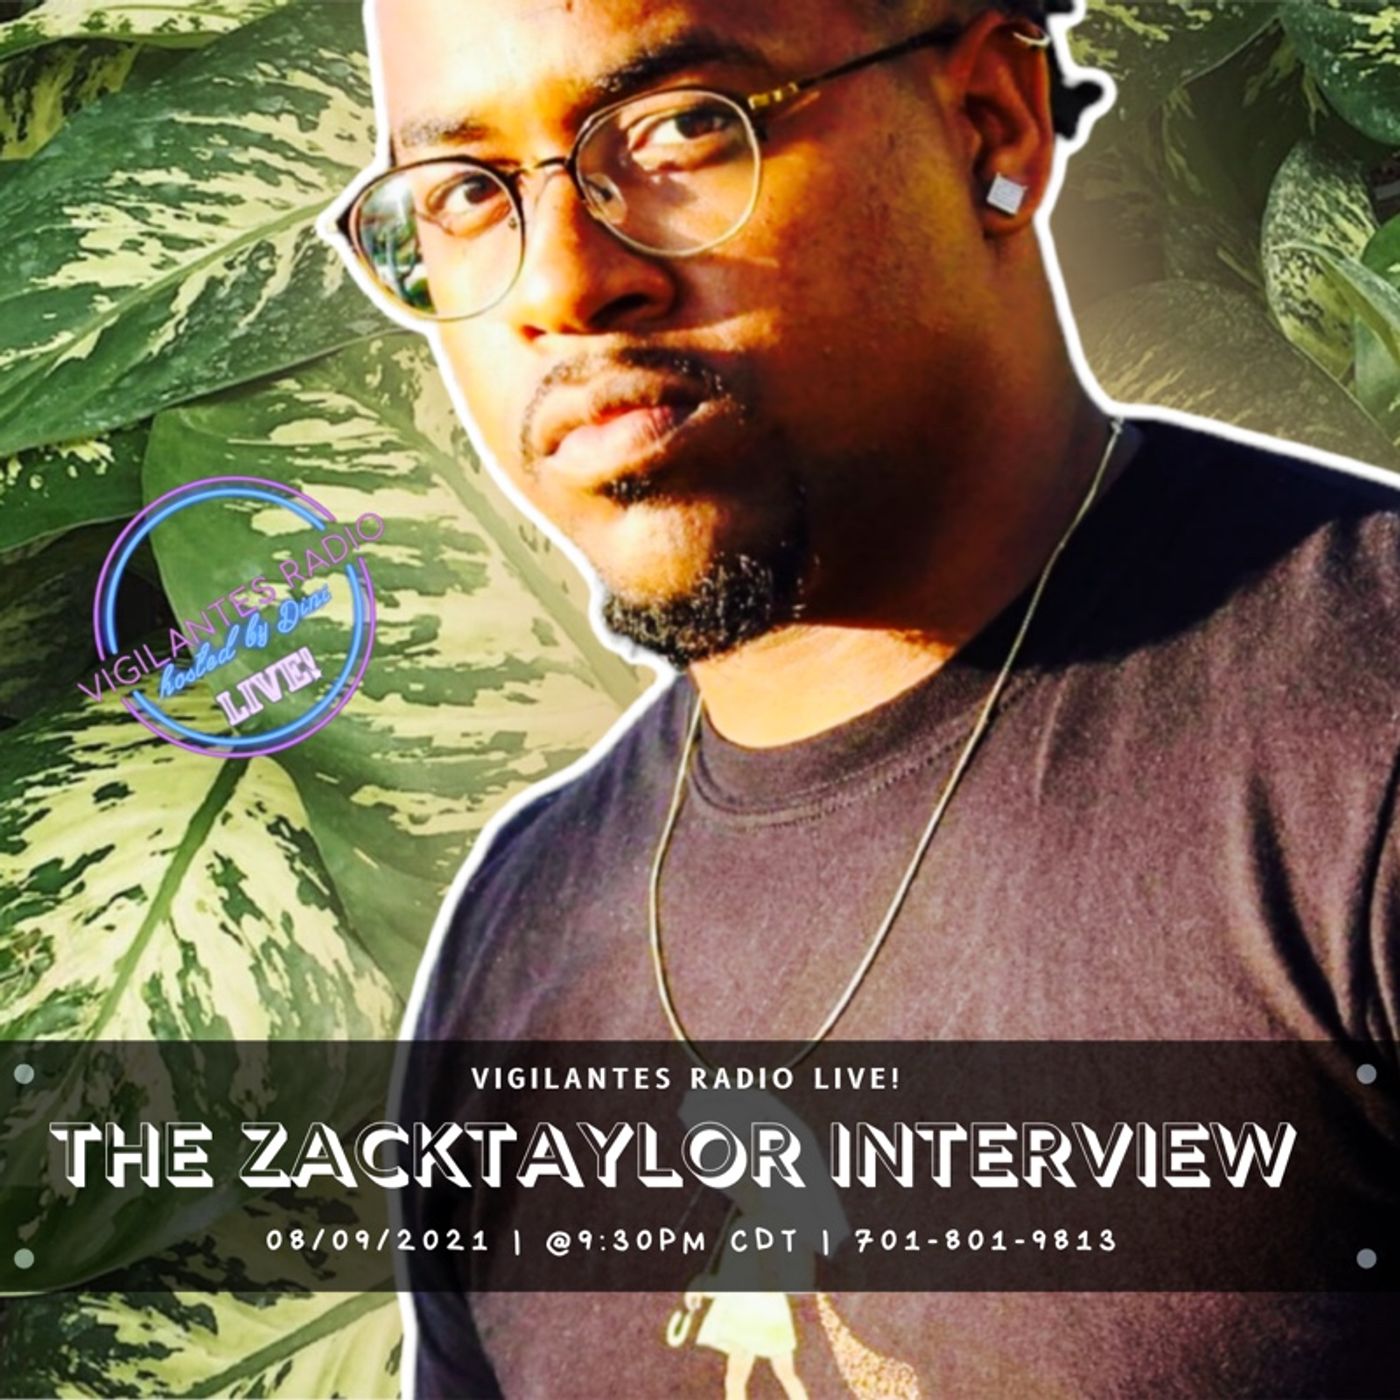 The ZACKTAYLOR Interview. Image